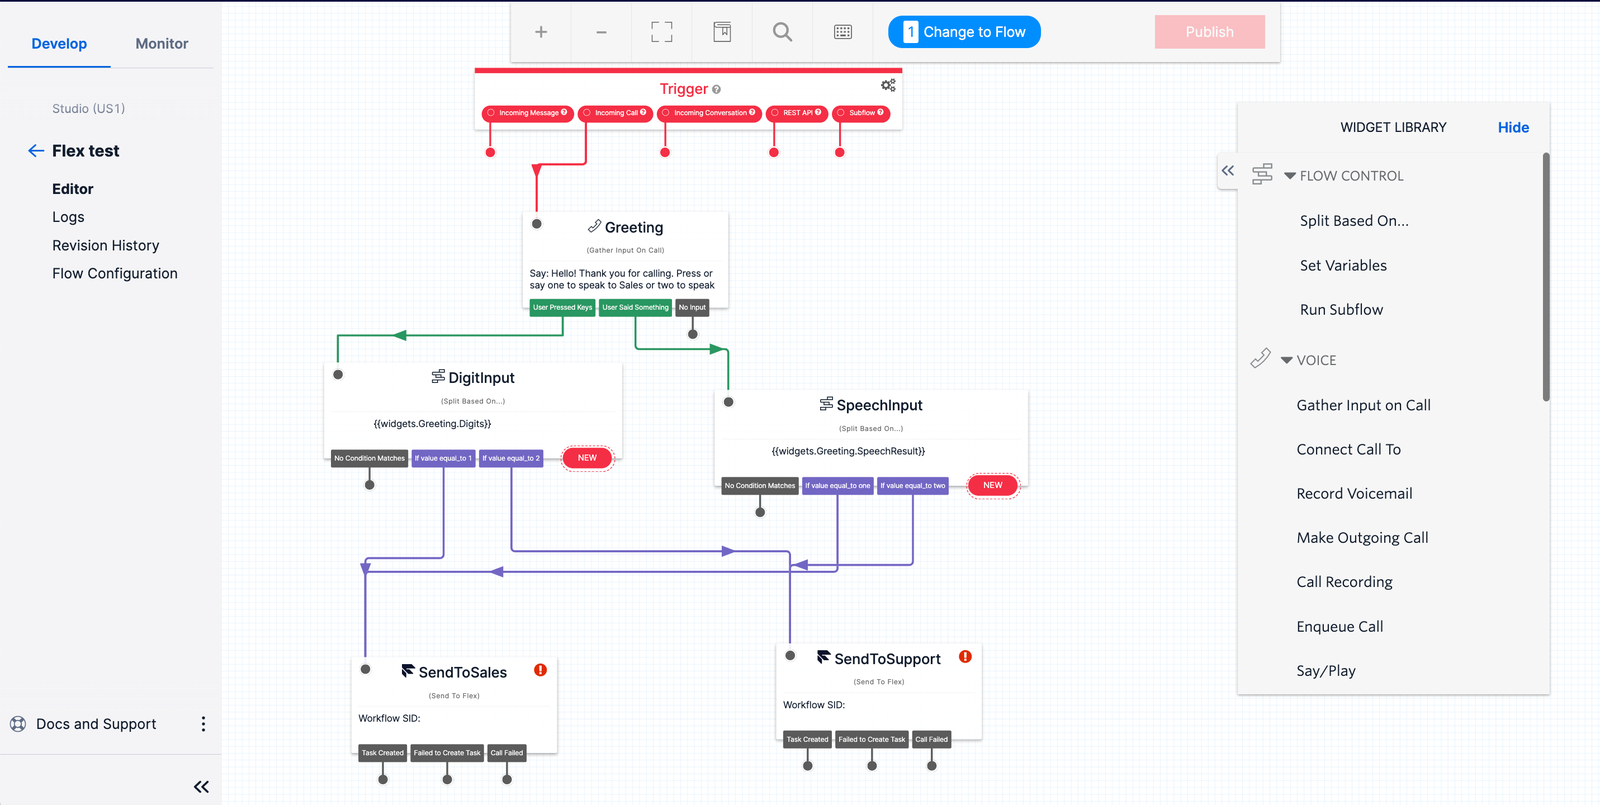 View of the Studio IVR Flow that you create after pasting in the JSON configuration.